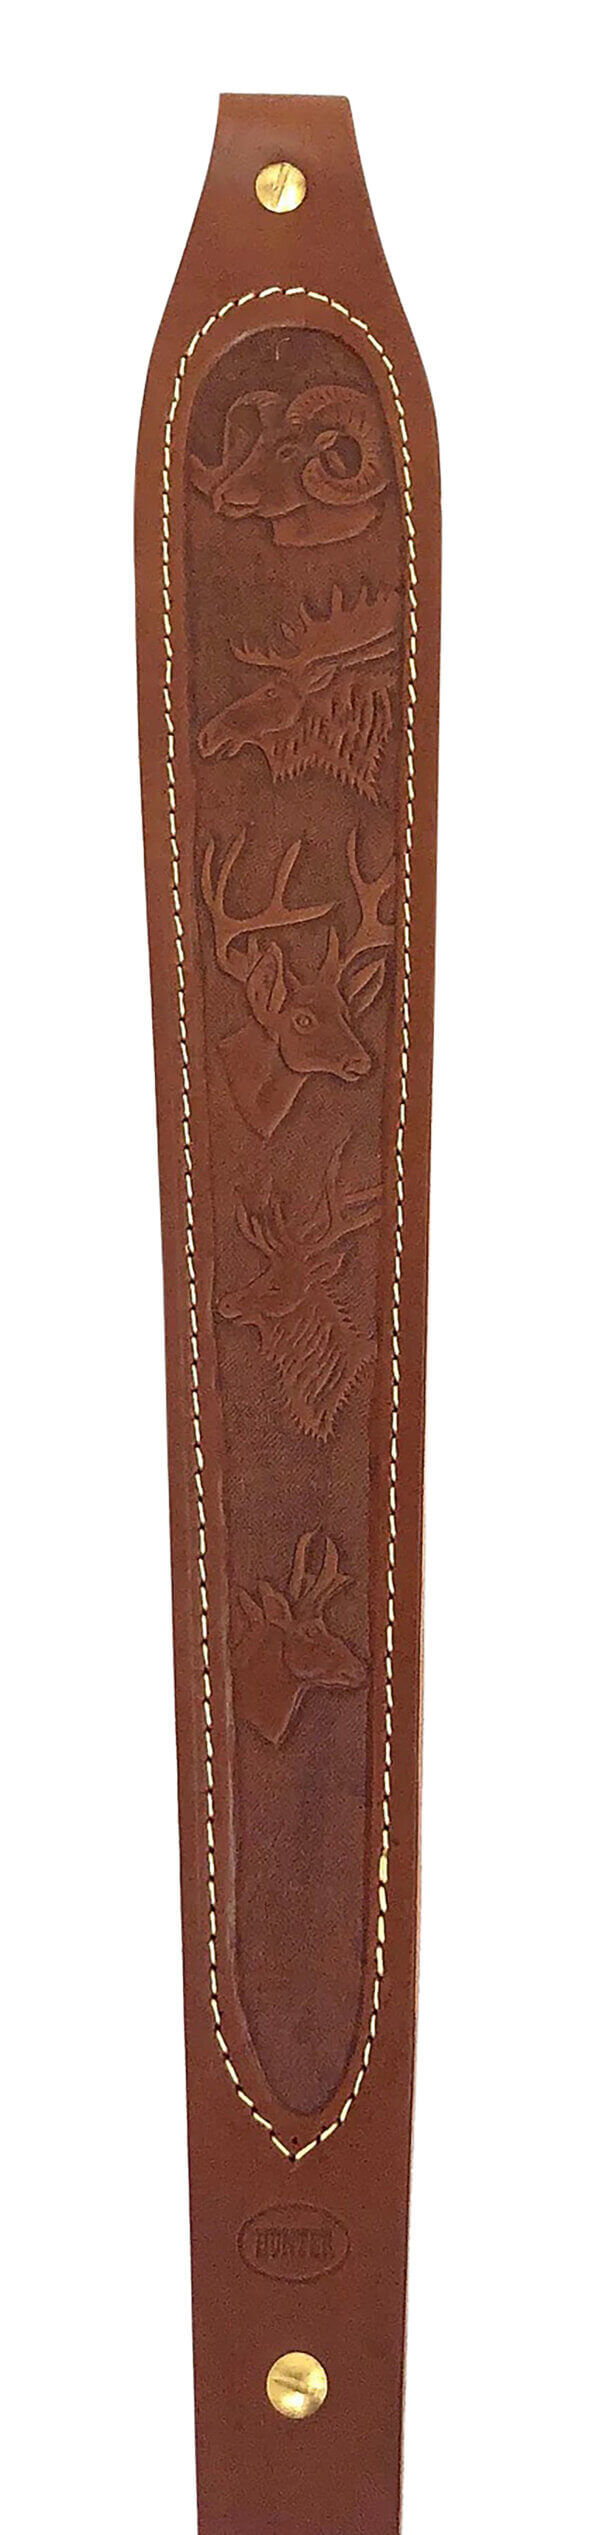 Hunter Company 027-148 Cobra Padded Chestnut Tan Leather/Suede with Safari Species Design